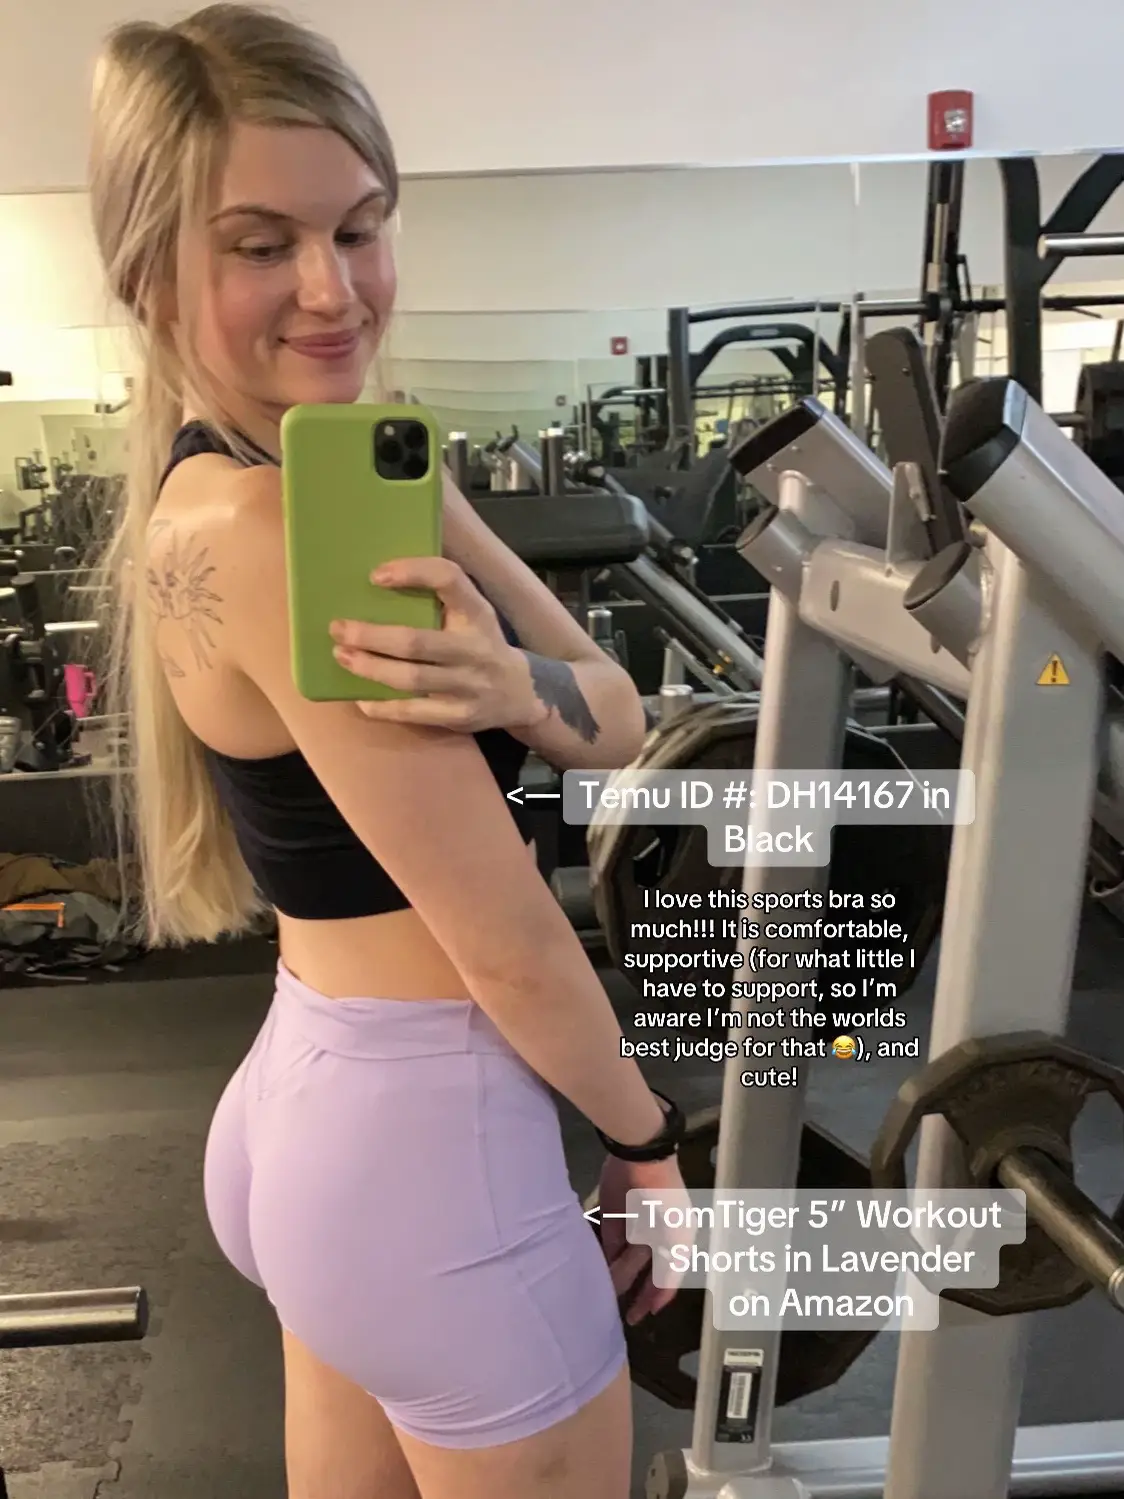 RECENT AFFORDABLE GYM FITS 🔥, Gallery posted by Briana💞🏋🏼‍♀️